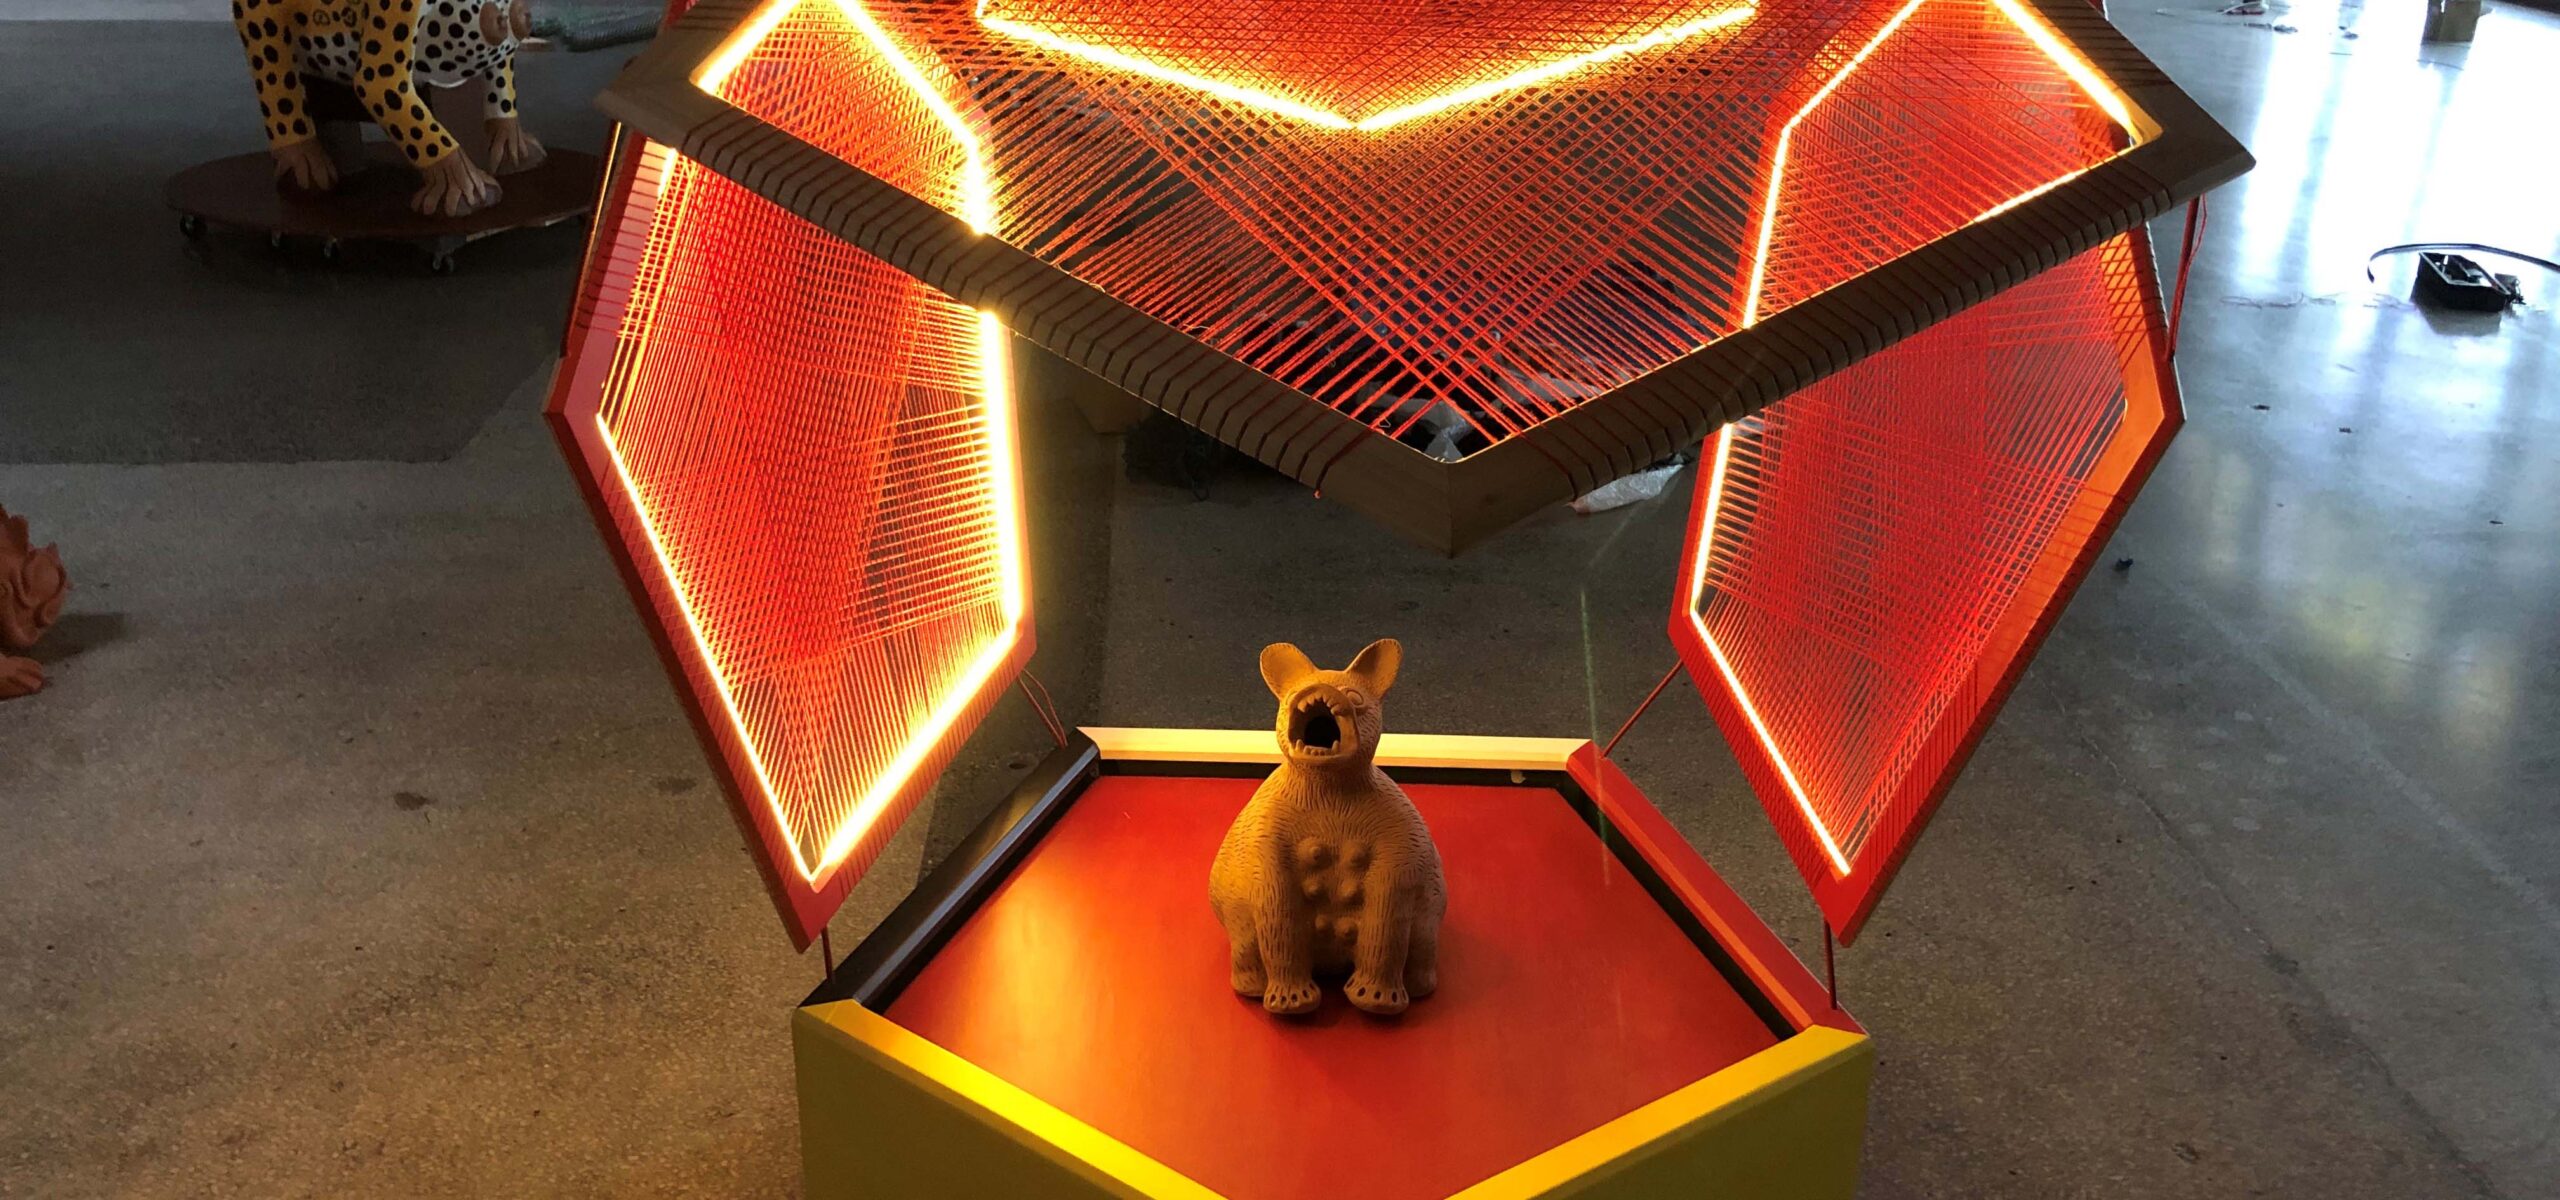 An art display with a clay figure inside a neon vessel.